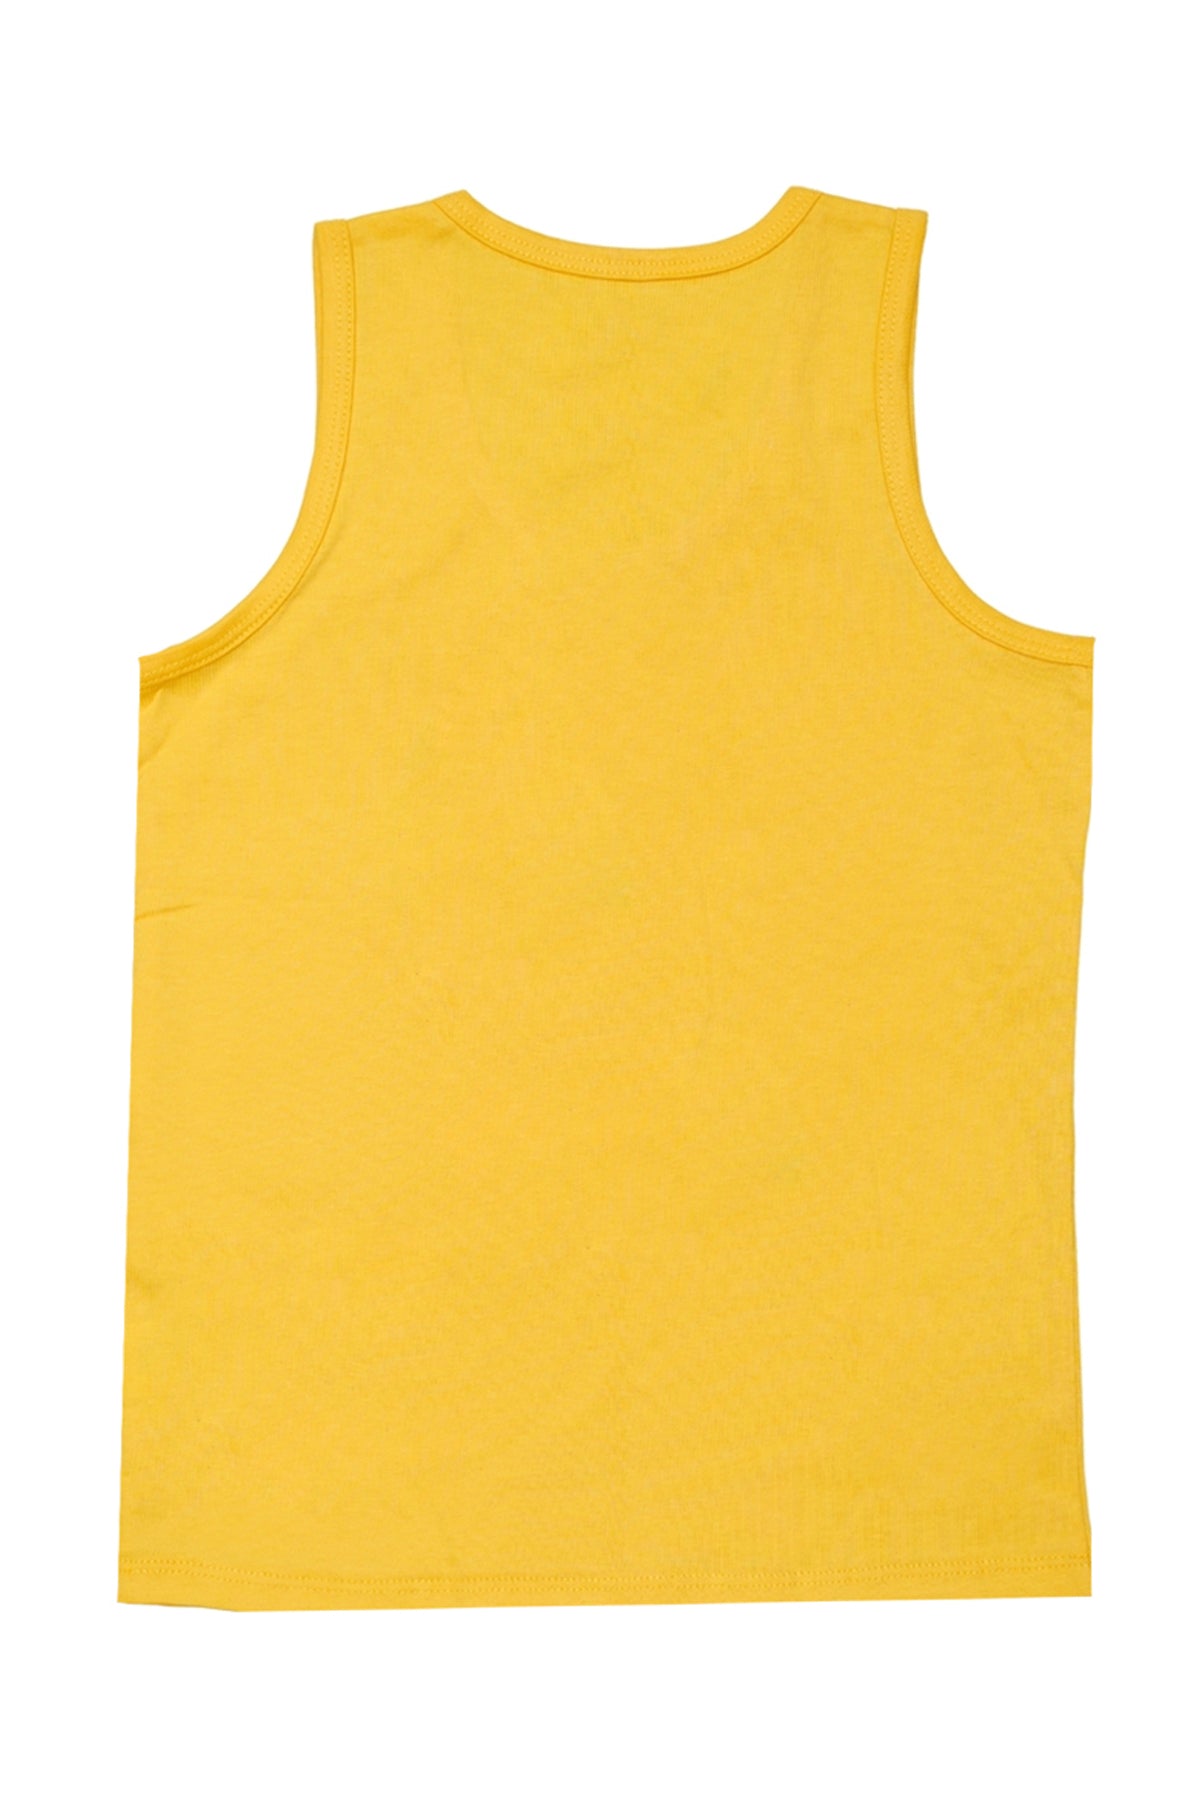 Graphic Vests (Pack Of 3) (BV-133)